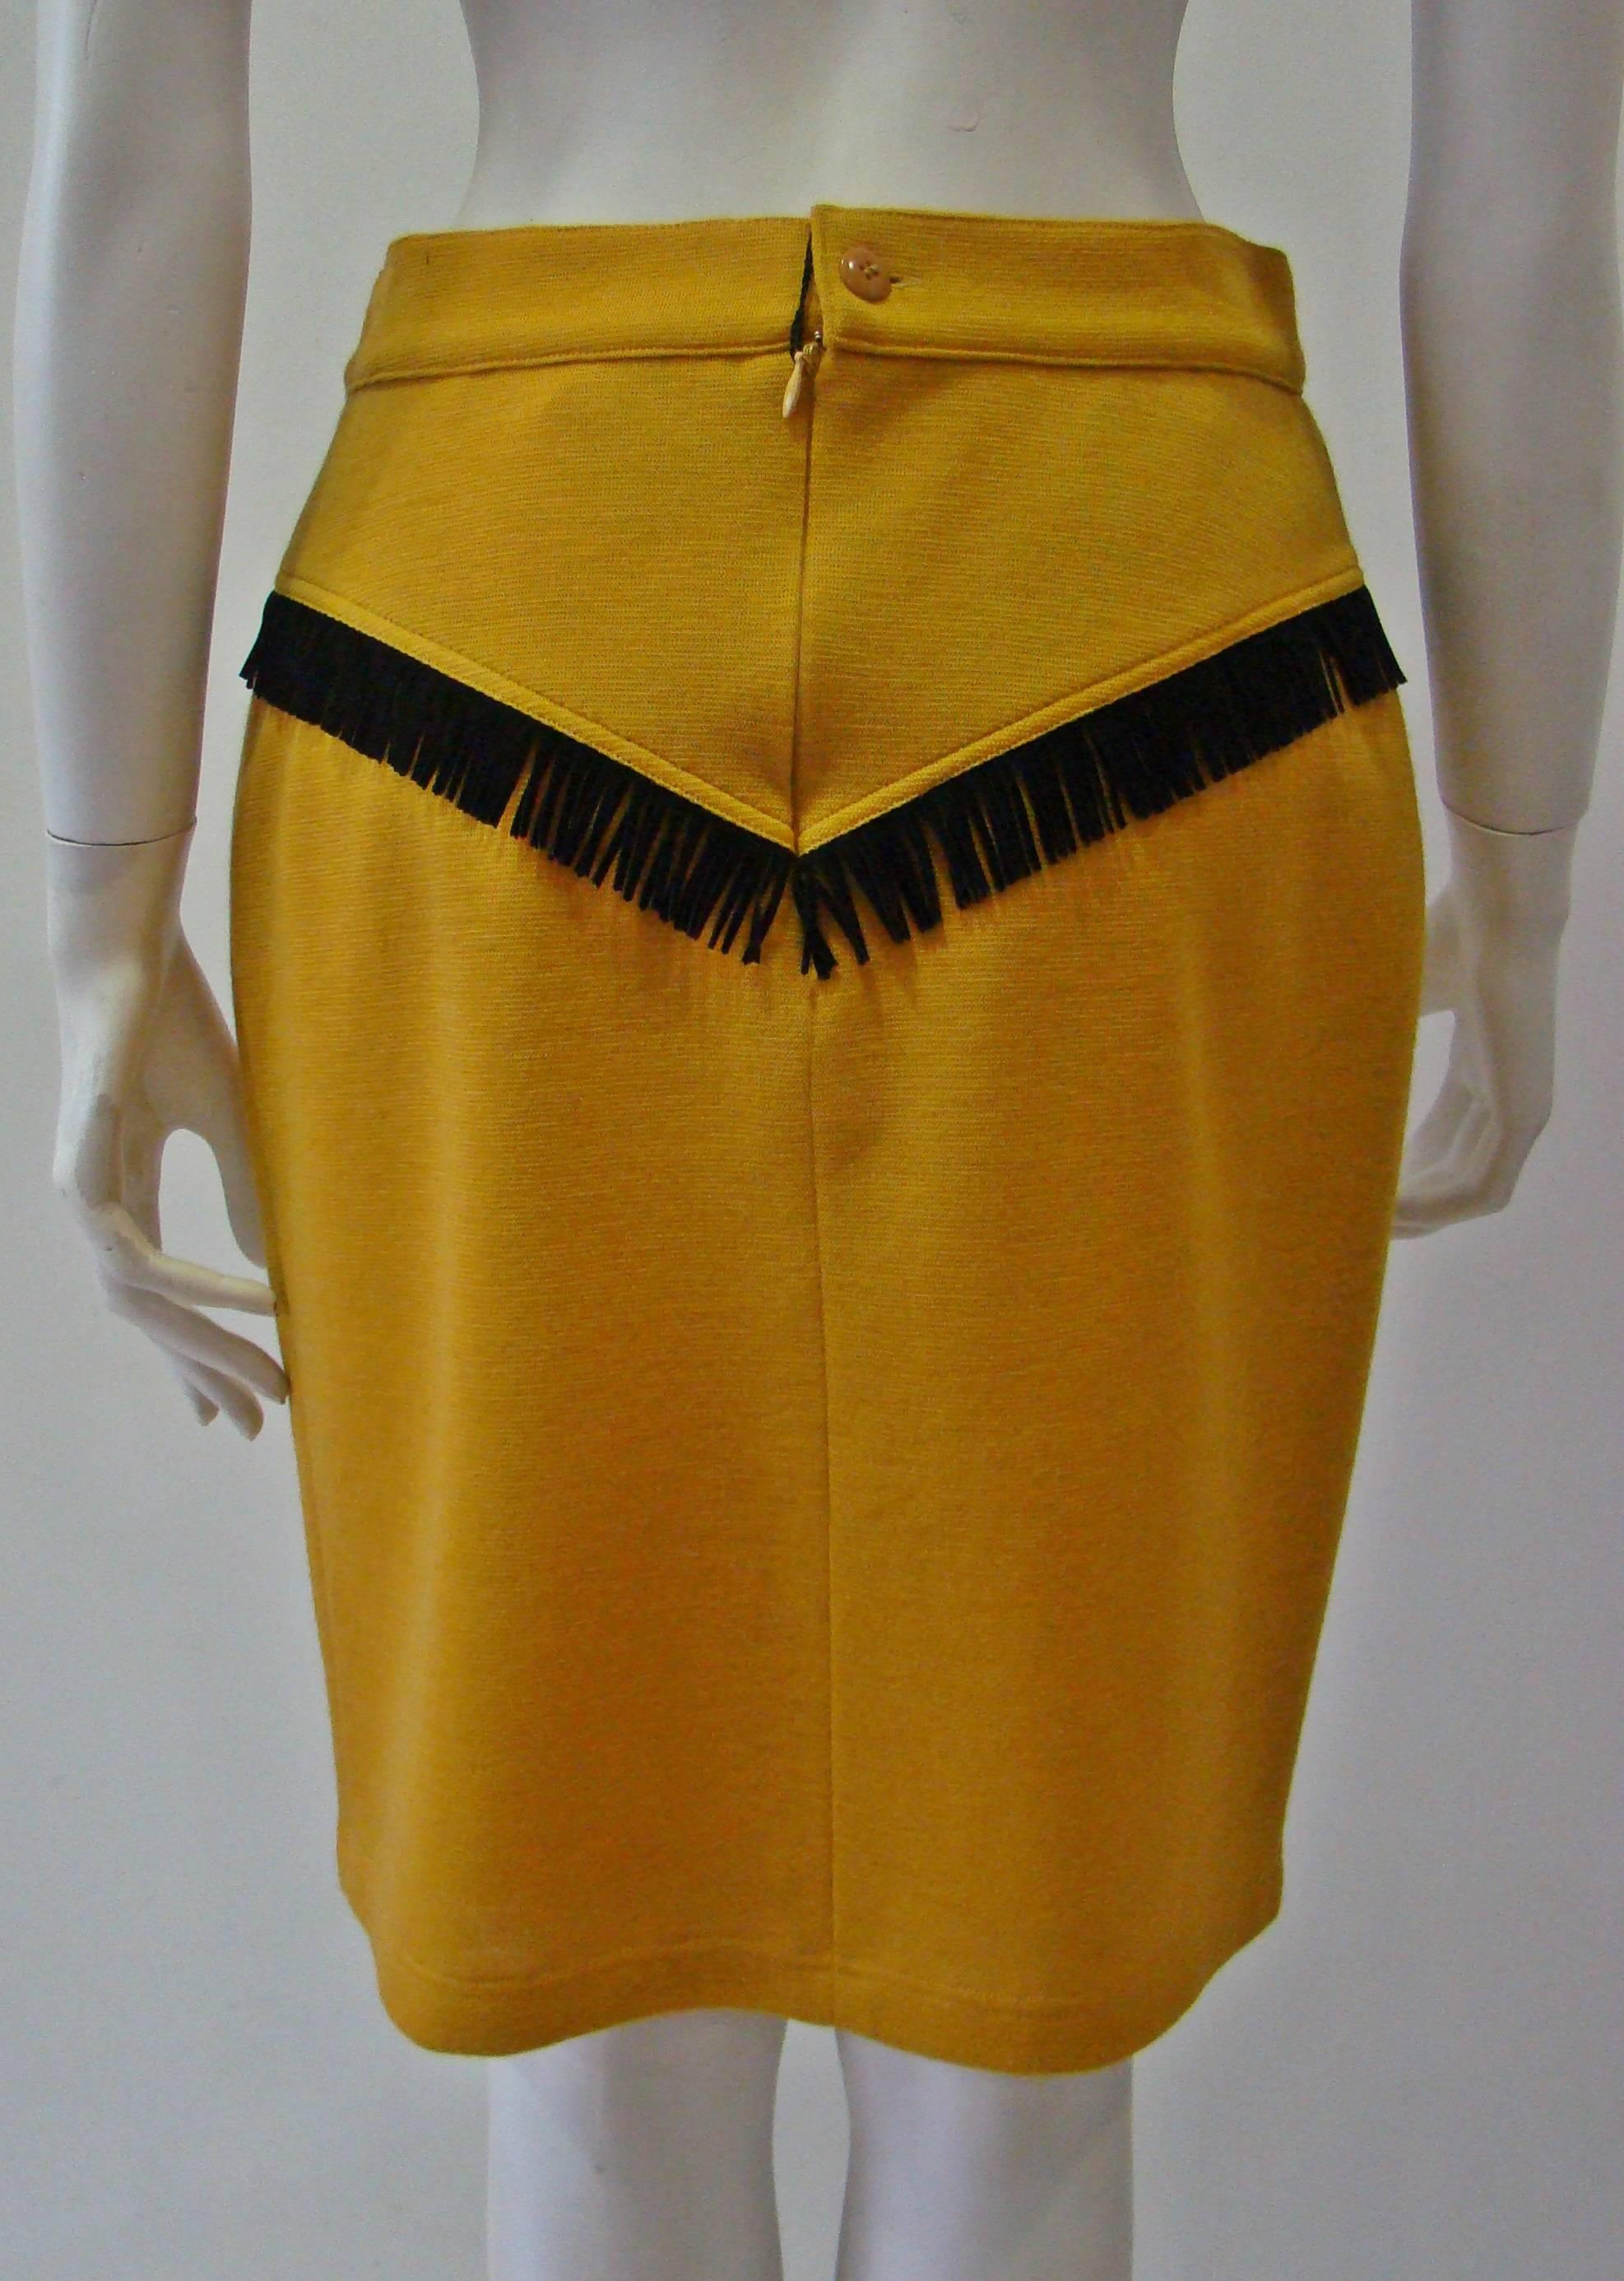 Women's Istante By Gianni Versace Wool Fringed Skirt Fall 1992 For Sale